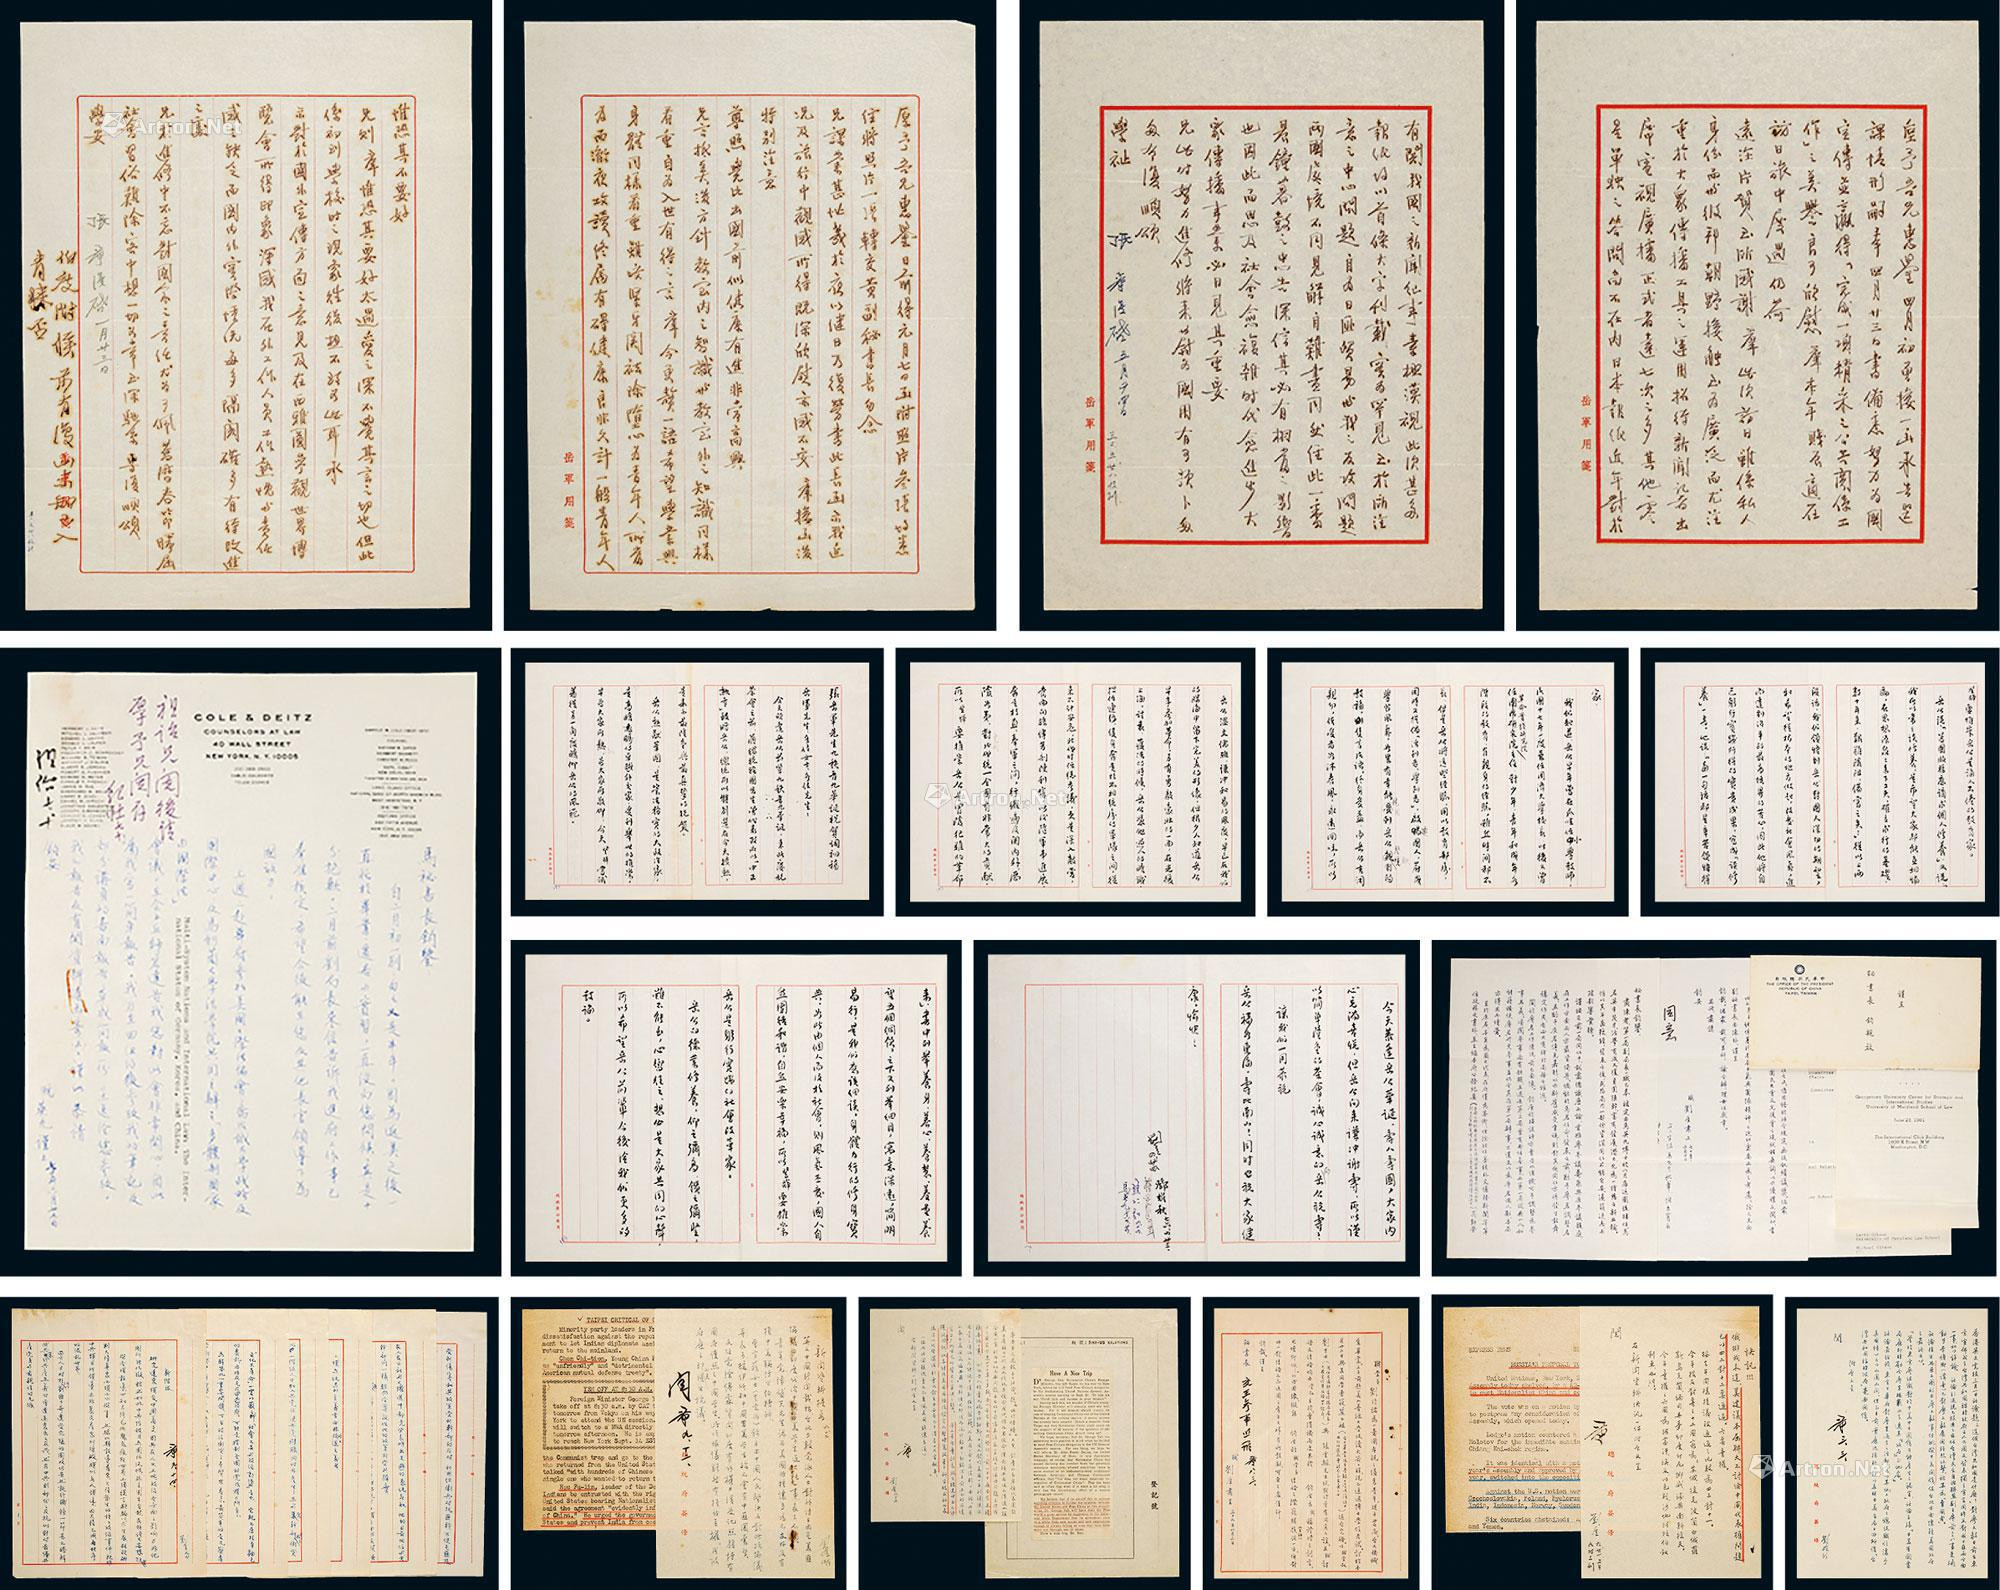 Eleven Group of 29 pages of letters by Zhang Qun, Ma Ying-jeou and Ma Jin-chong to Liu Chu, the director of the First Bureau of the Administration of Taiwan Congratulation, Zhang Qun’s birthday speech and manuscript materials, with cover